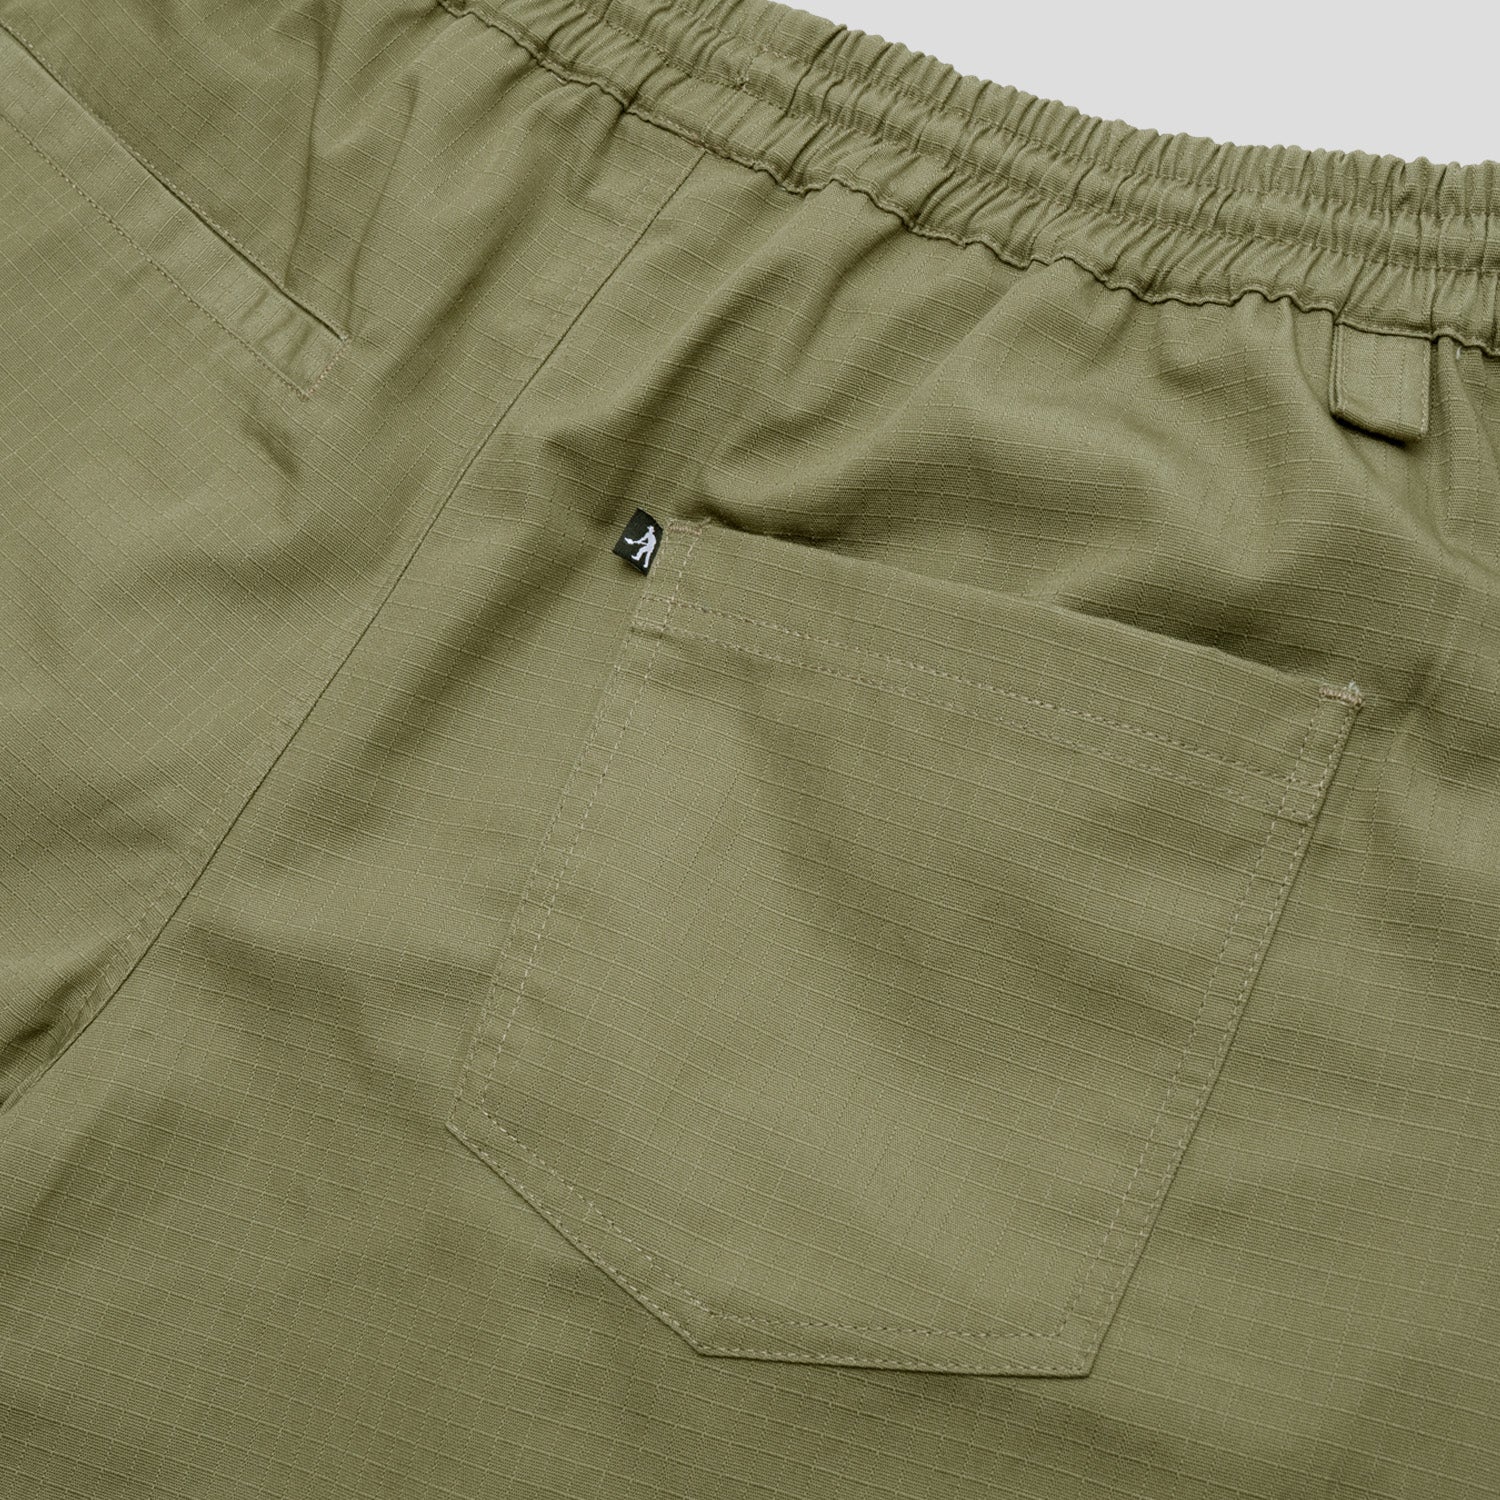 Pass~Port Transport Ripstop Workers Short - Olive